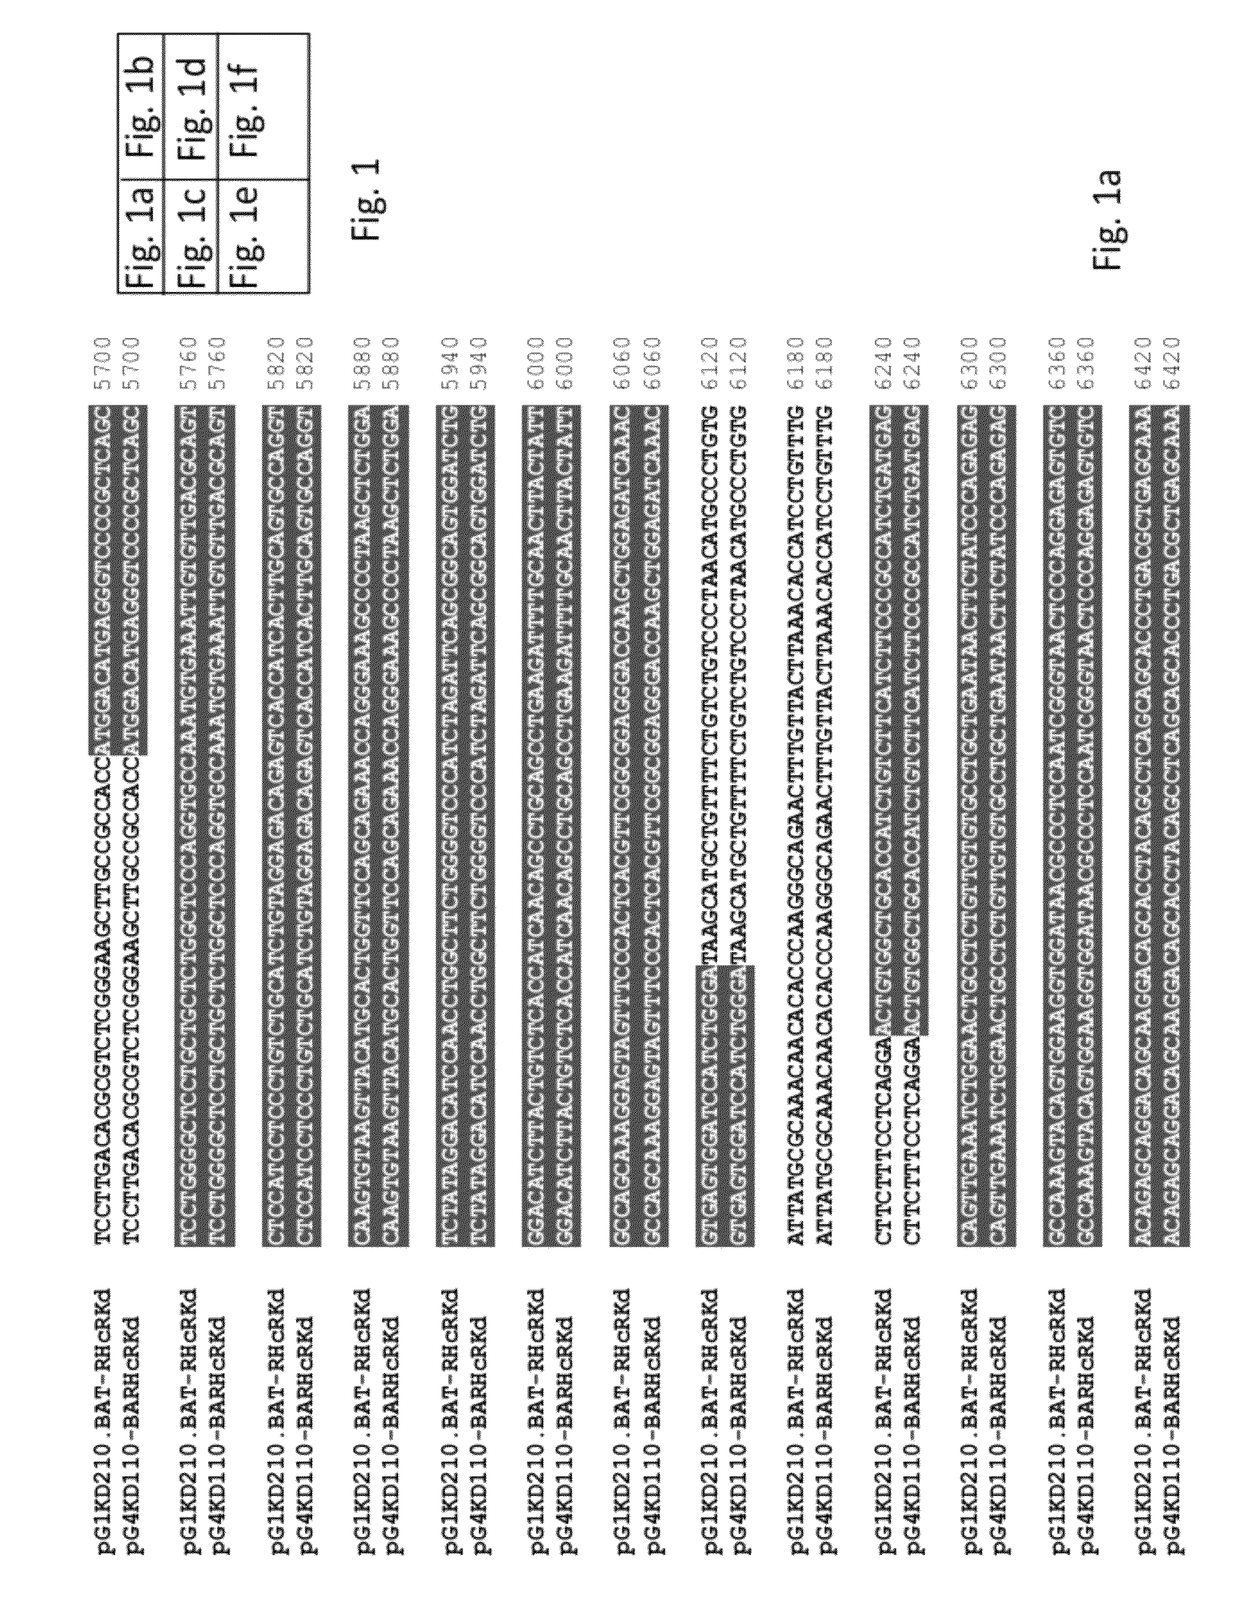 System and method for production of antibodies in plant cell culture